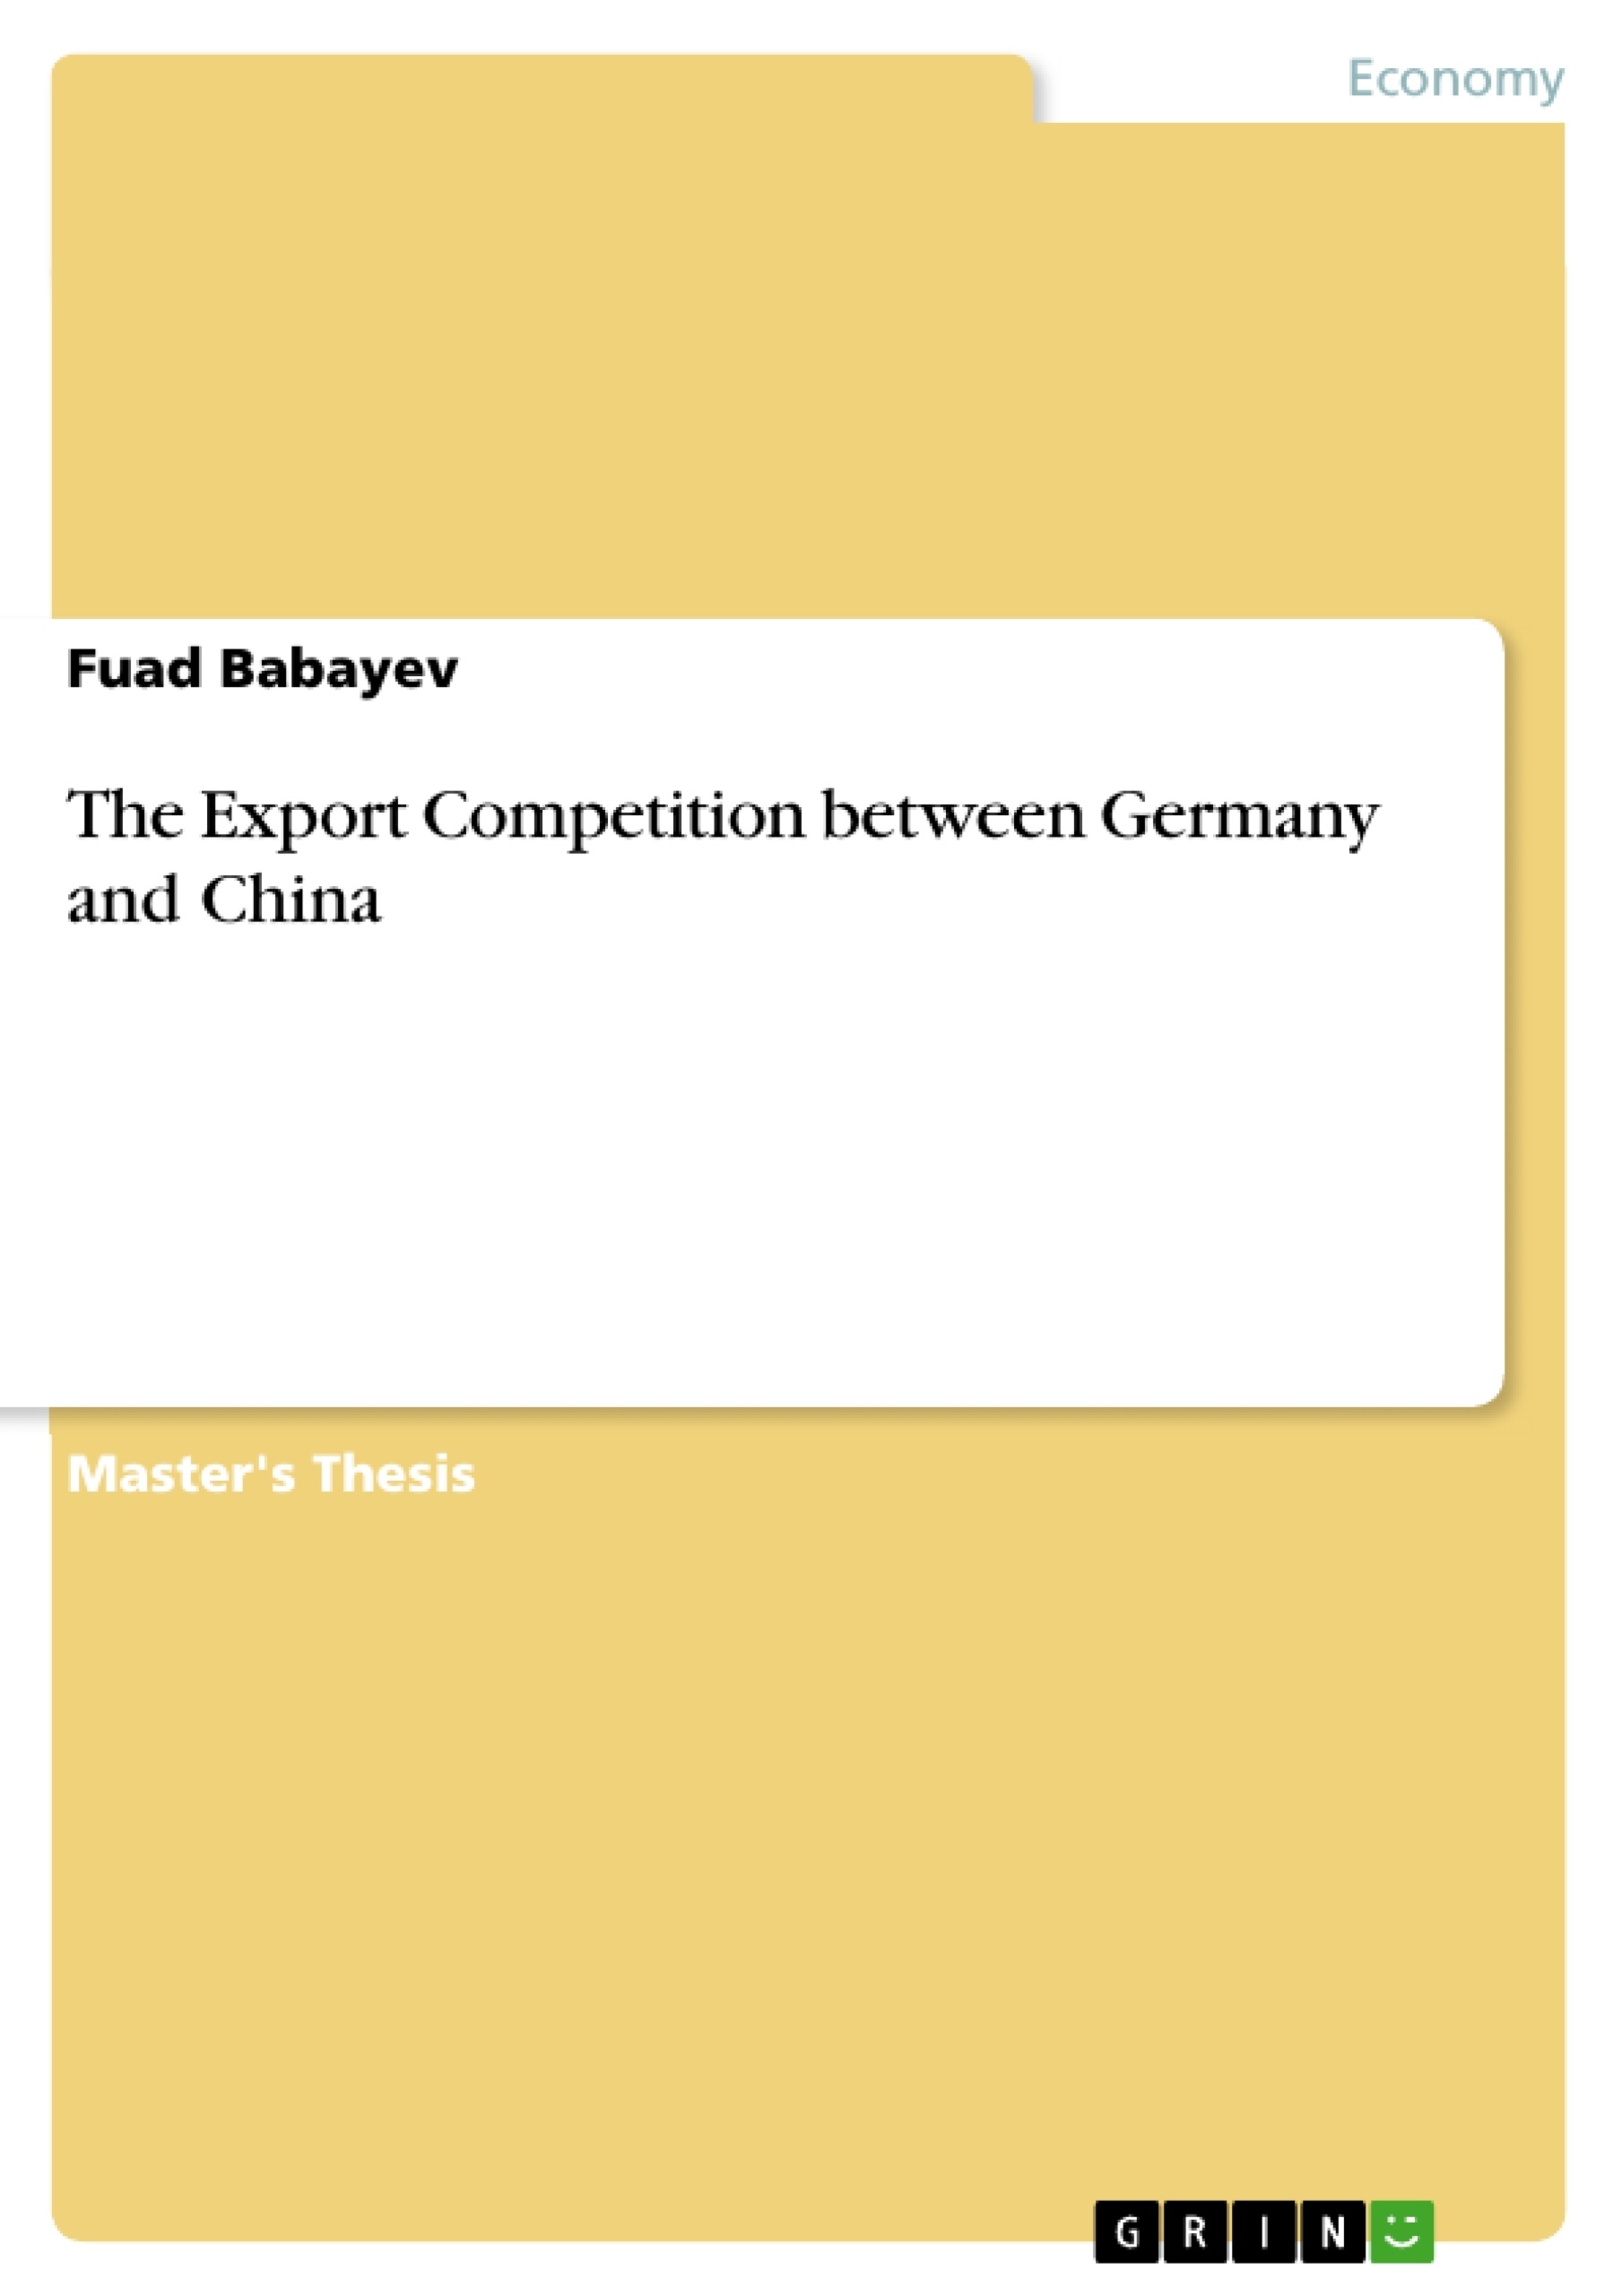 Title: The Export Competition between Germany and China